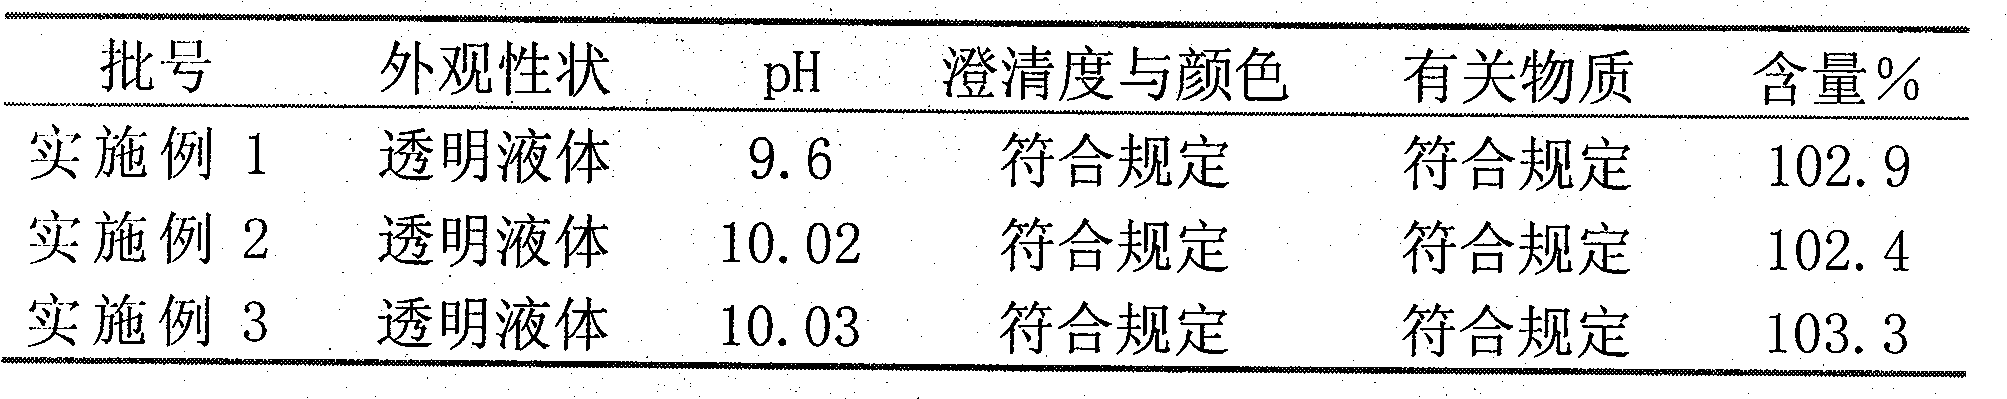 Stable tegafur injection formula and preparation process thereof